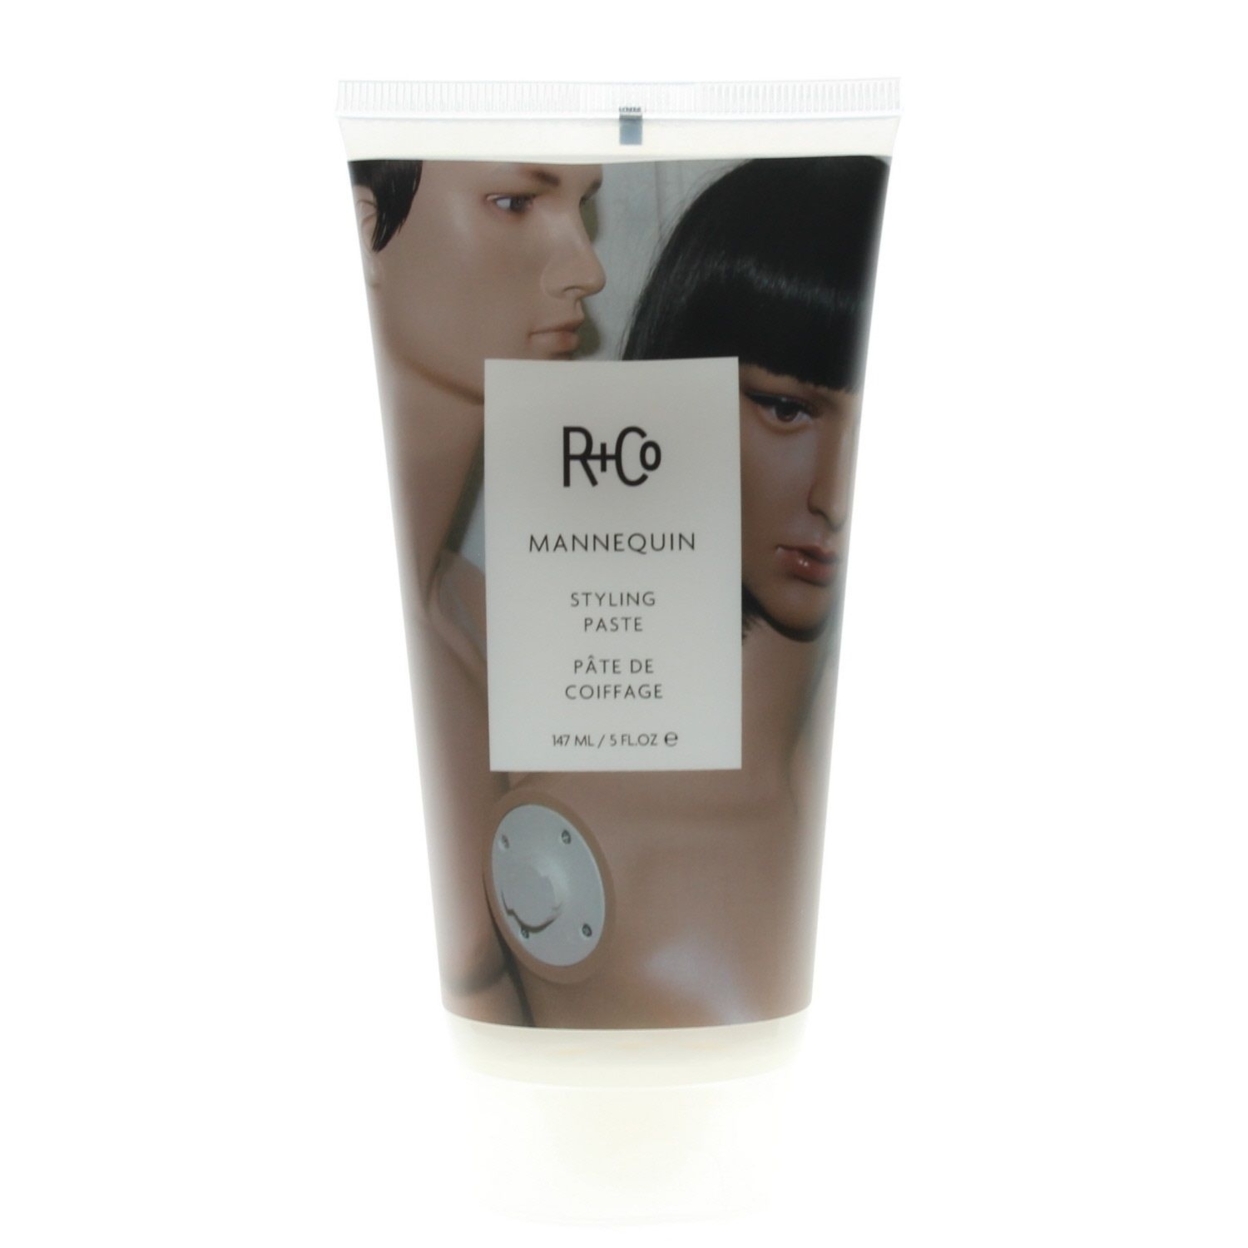 R+Co Mannequin Styling Paste 5oz/147ml